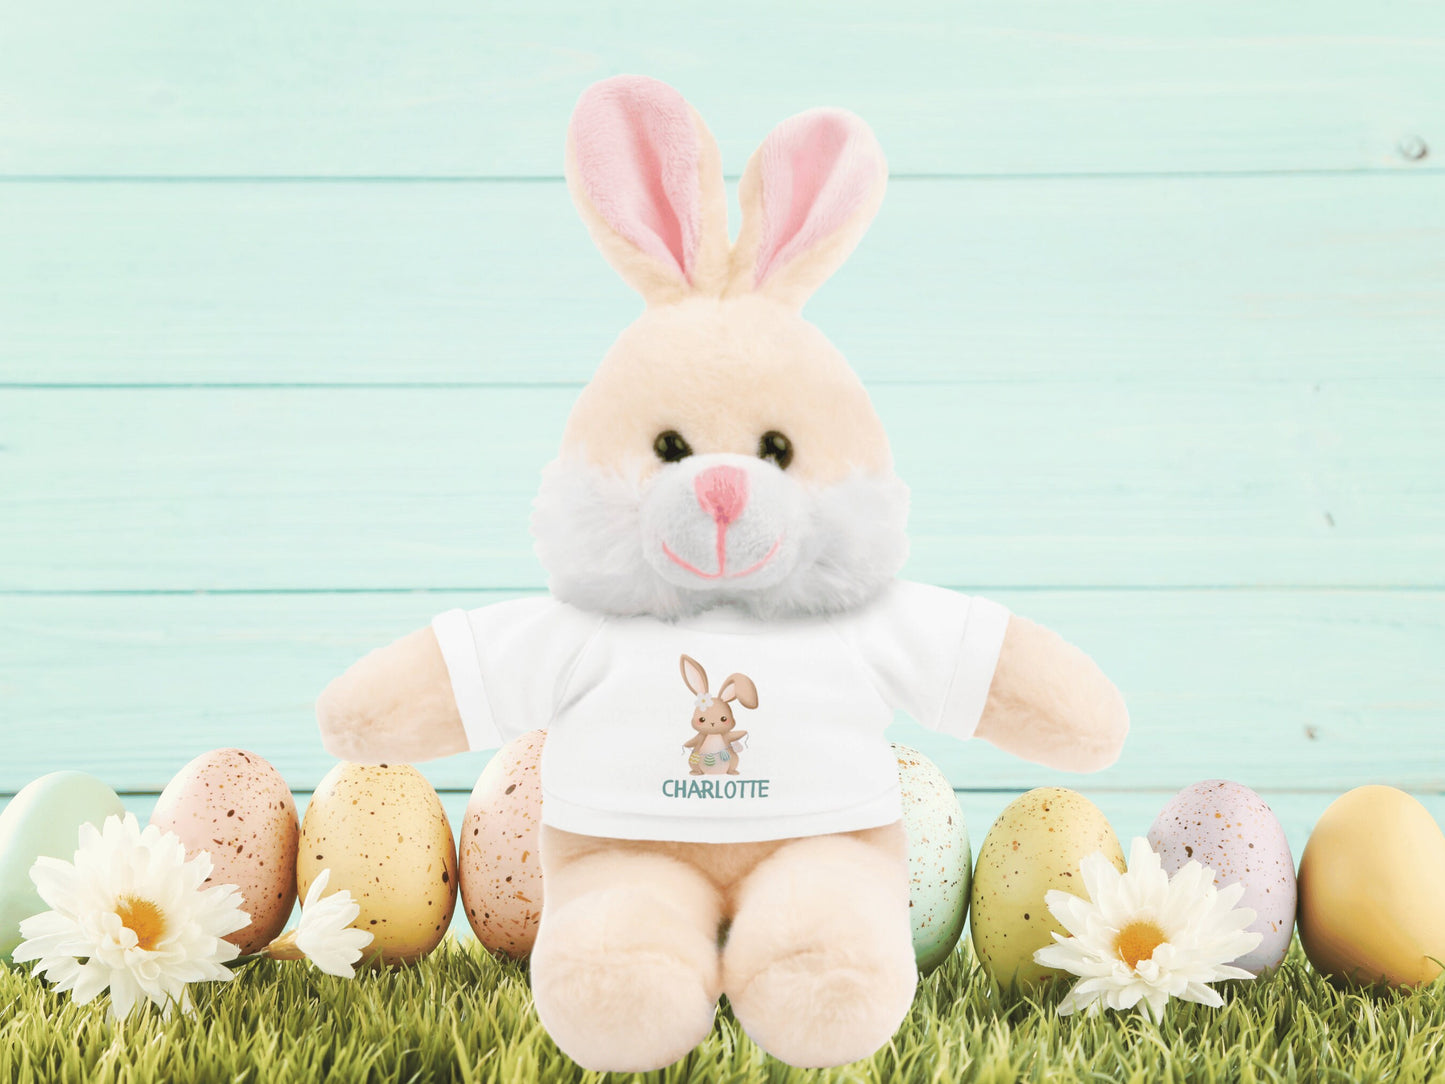 Personalized Easter Bunny, My First Easter Bunny,Personalized Bunny, Baby Easter Gift, Stuffed Easter Bunny,Personalized Rabbit, Kids Easter